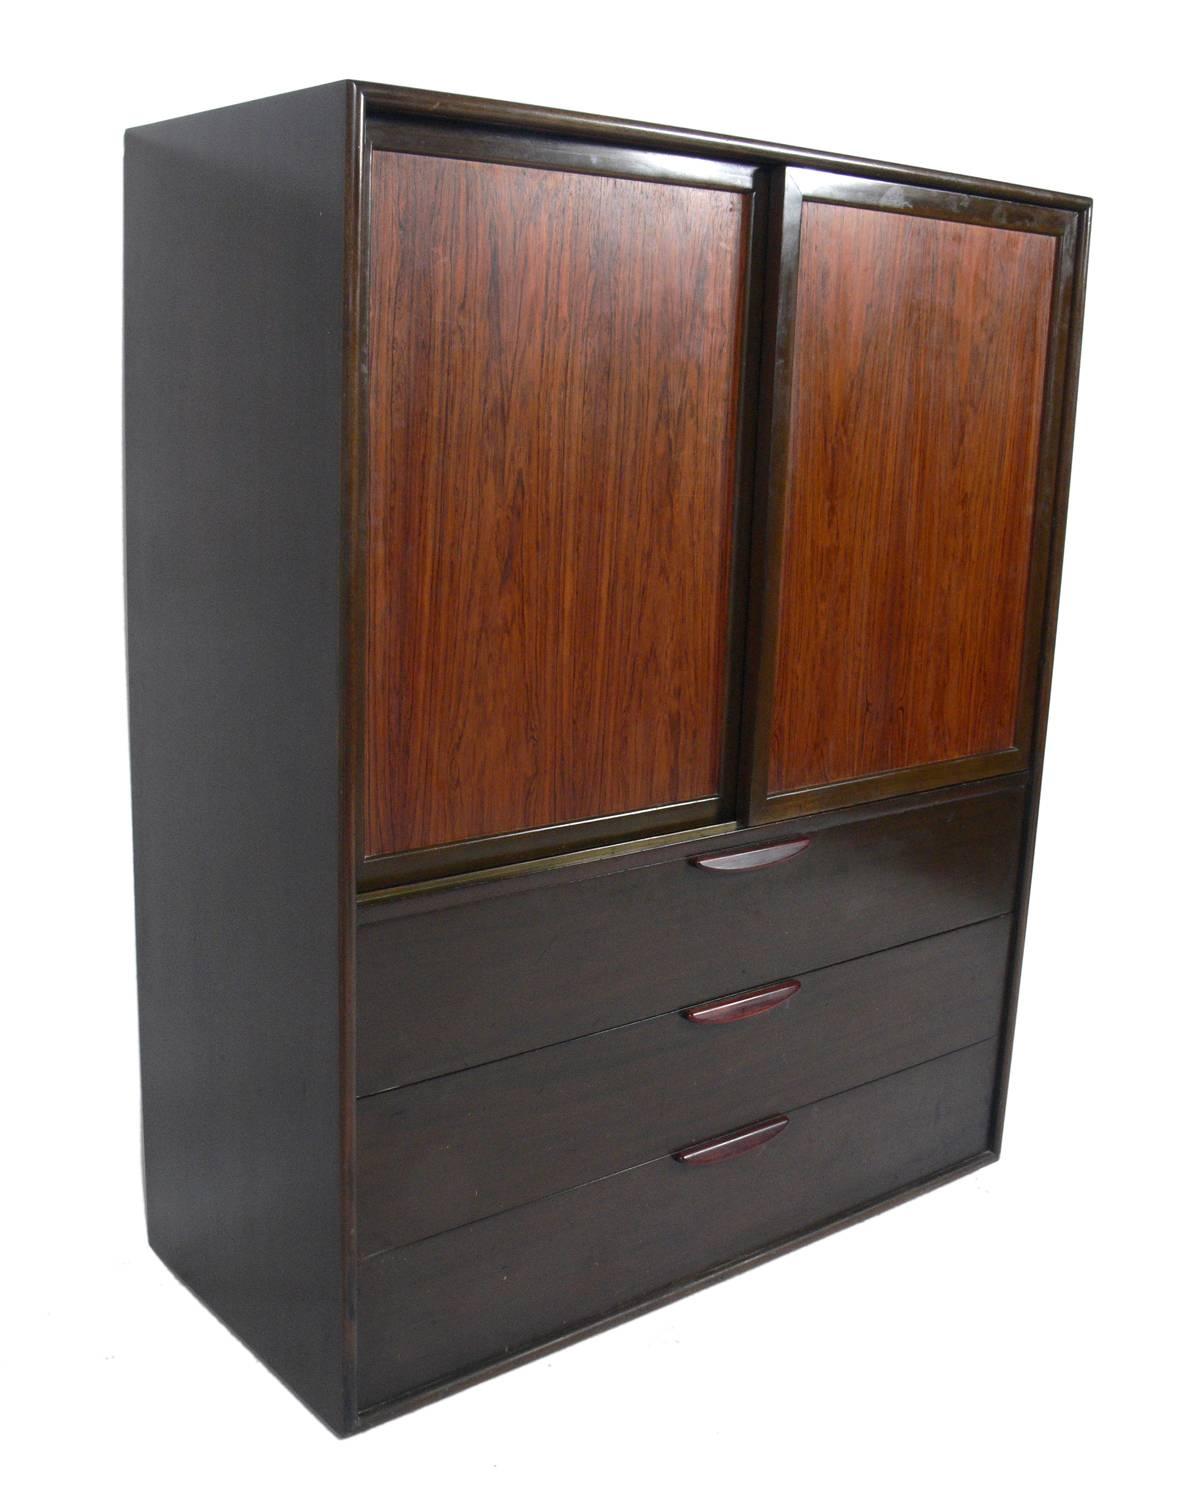 American Tall Rosewood Chest of Drawers designed by Harvey Probber